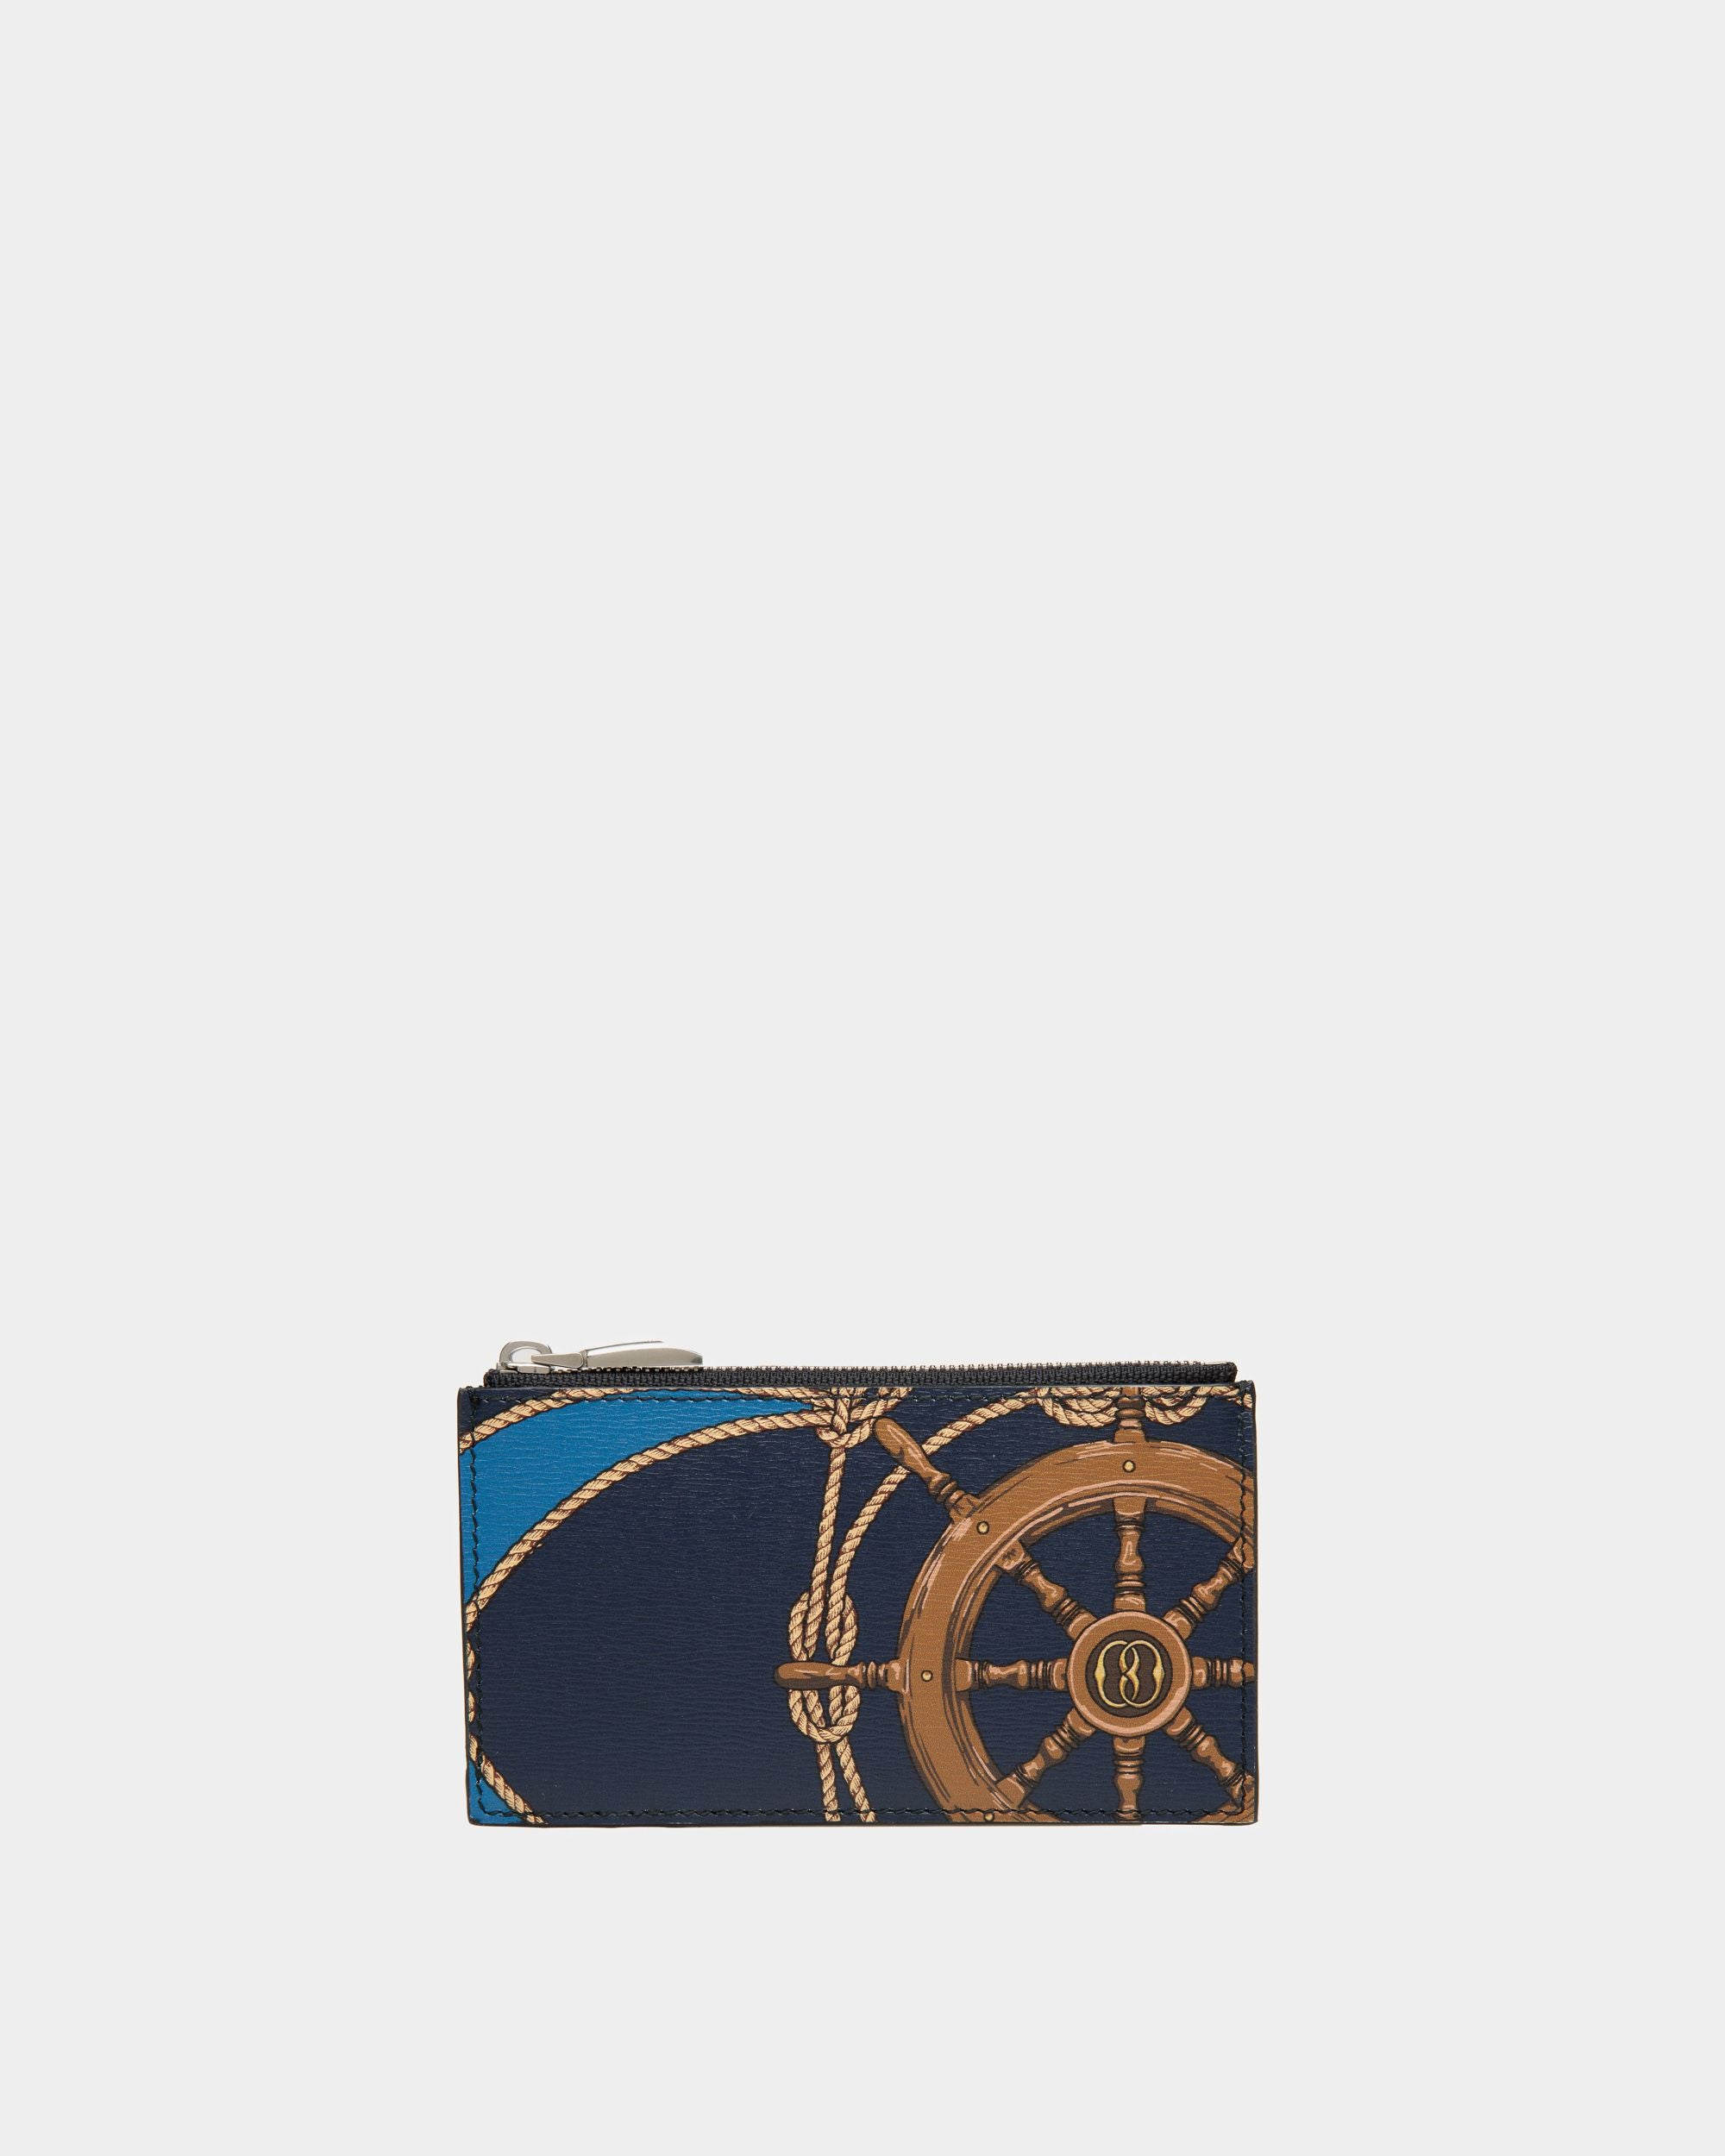 Crossing | Men's Coin & Card Holder in Blue Leather | Bally | Still Life Front